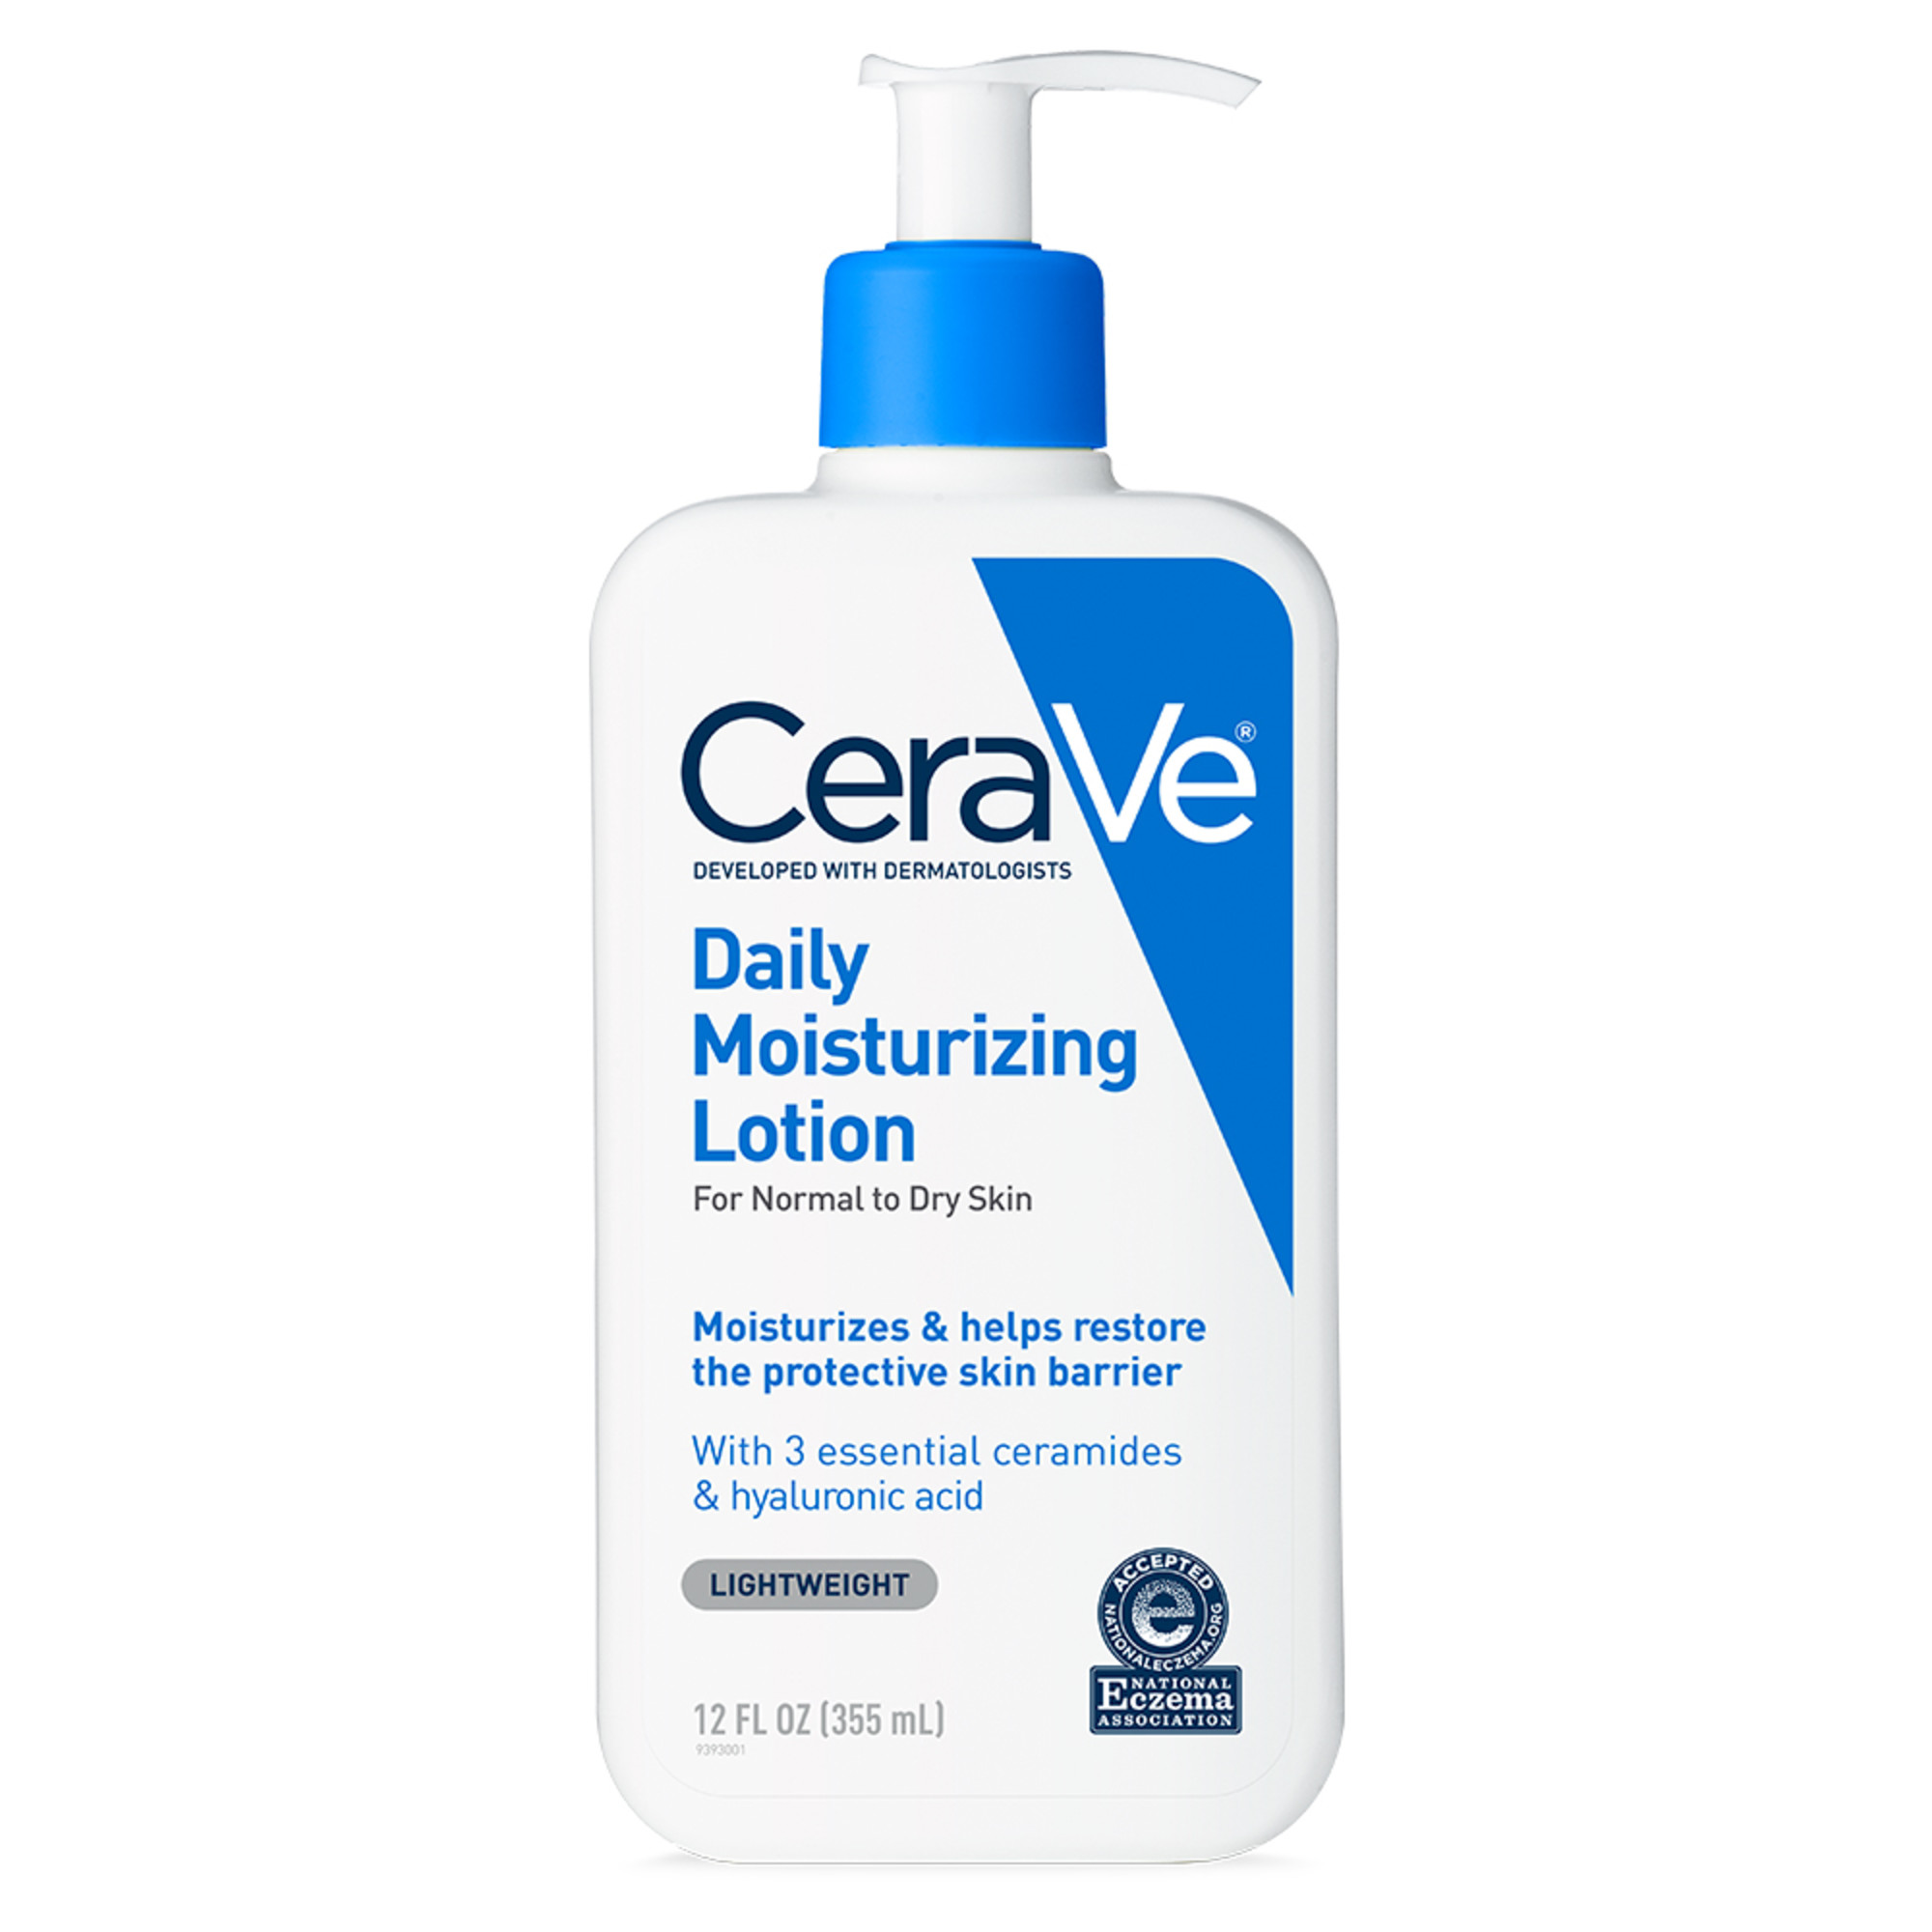 CeraVe Daily Moisturizing Face & Body Lotion with Hyaluronic Acid for Normal to Dry Skin, 12 oz - image 1 of 16